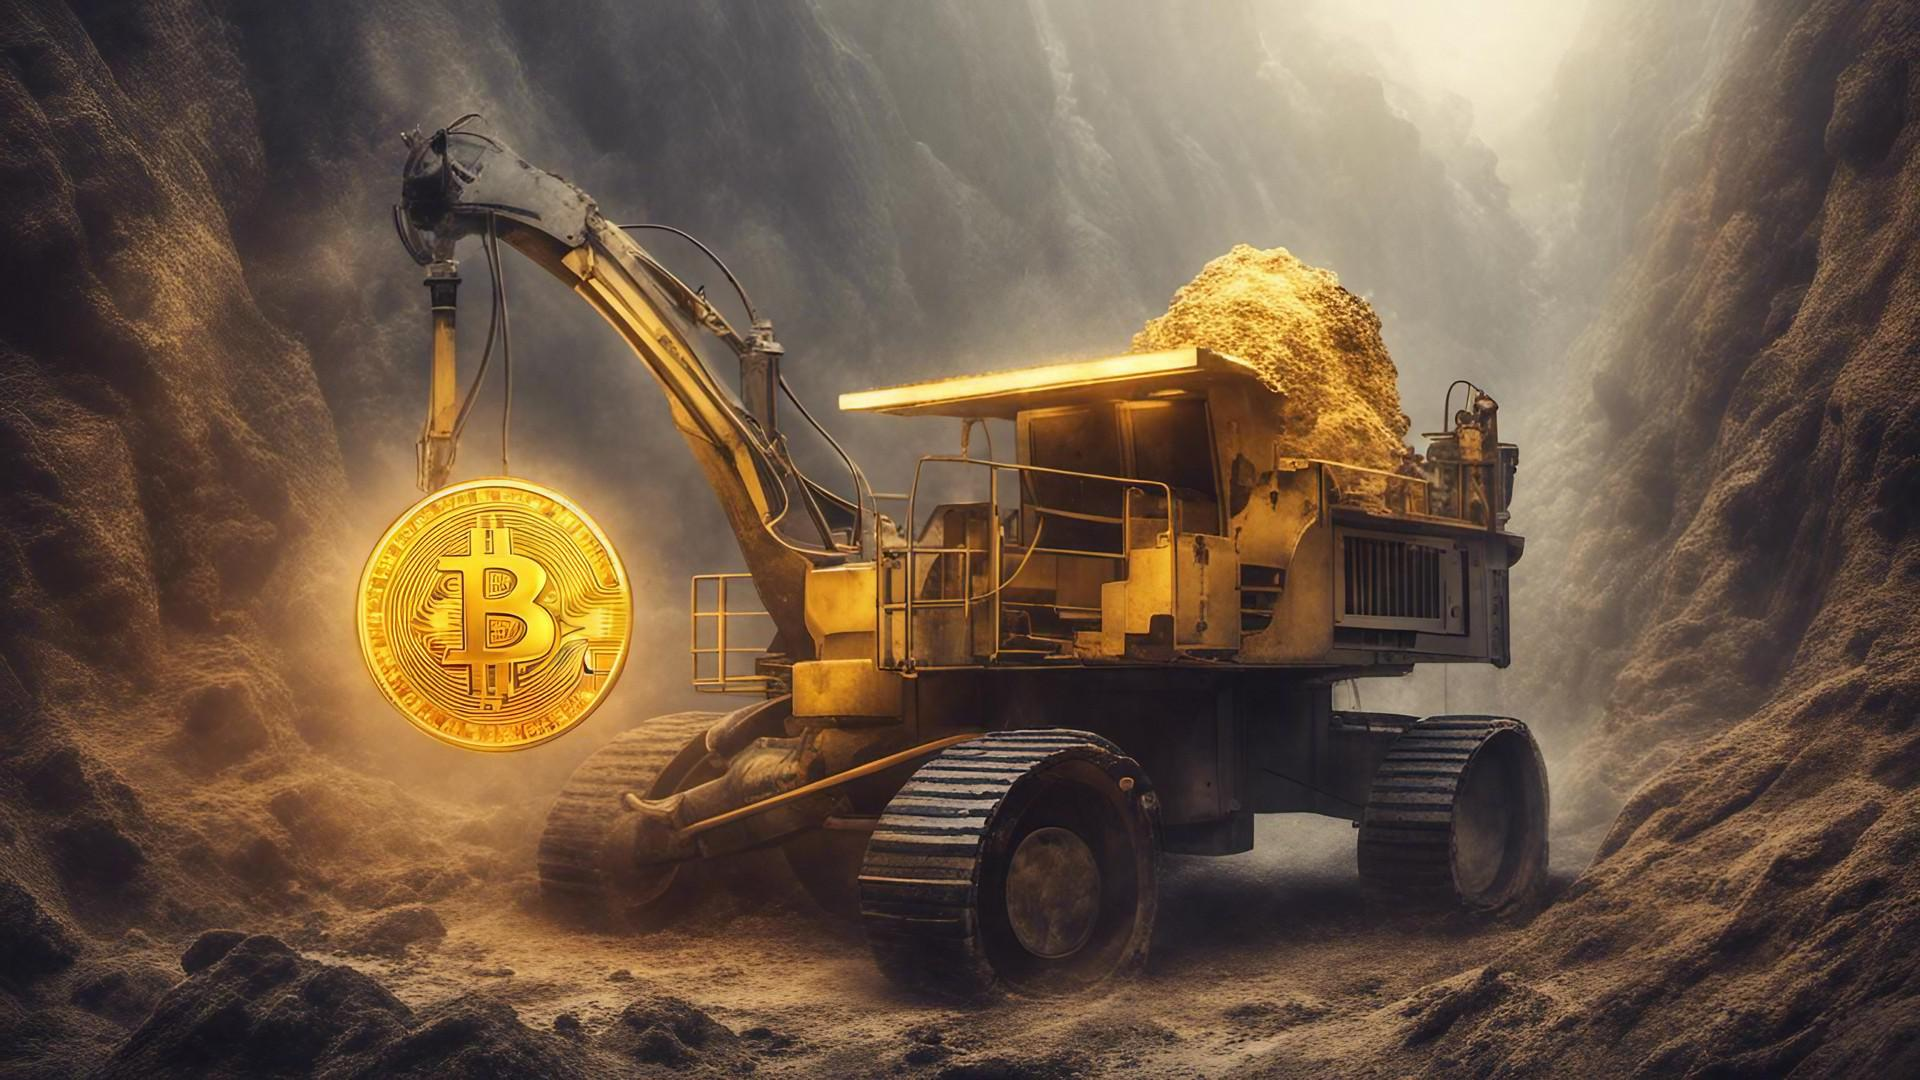 An image of a mining rig mining Bitcoin